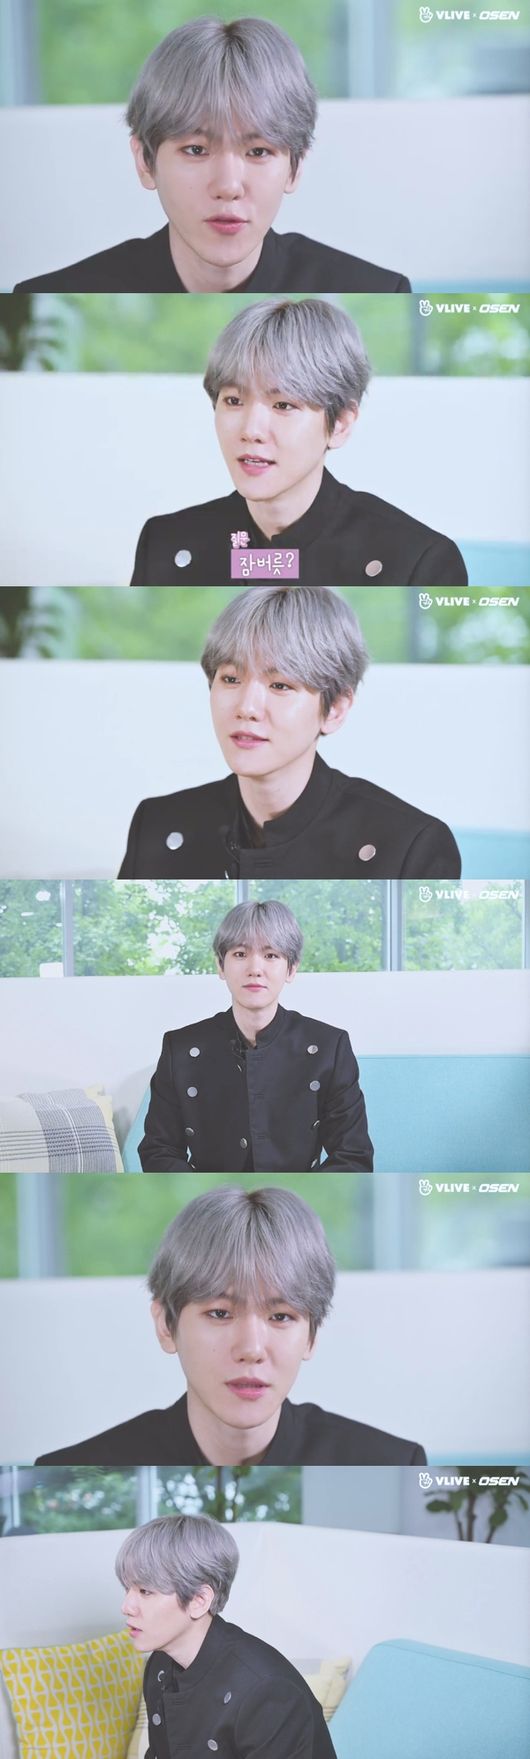 The TMI of the group Exo Baekhyun was released.Baekhyun conducted a TMI interview on the 19th of the Nave V Live channel Star Road.On this day, Baekhyun gave a witty answer to the question baptism of the production team. Baekhyun was born on May 6, and is from Bucheon, Gyeonggi Province.Baek-hyuns favorite movie is John Wick because the action is cool. And Baek-hyuns most admired movie is his parents, and his motto is Only effort is the way to live.Baek said he would choose Pizza if he could only eat one food for a week. I personally love Pizza. Its been a long time since I havent eaten it.Baekhyuns most confident field was singing and playing games. I am confident that the song has been going on since I was a child, and the game is so good, he said.In the meantime, Baekhyun expressed his desire for his professional gamer debut. I want to try professional gamers. I want to go to e-sports while staying with professionals properly.I think its a new challenge, he said.Baekhyun, who said he did not want to unpack his study paper when he was a child, said, I was always pushed for two to three weeks.I confessed to my mother in the second grade, I do not know why I should do this. I have told her that I will not sit down.The toy I liked as a child was a transformation robot. It was a train-shaped and changing robot.If you are similar in age to me, you will know. Baekhyun built a three-way poem in his name, which was based on what he had already built in elementary school. Baekhyun said, Byeon Baek-hyun built a three-way poem that would make a million fans.It became a reality, he said. There is a data screen. My mother took it when I was a child.I like the fine dust levels these days, and fine dust has been good for a week as of today, so I am so happy these days, said Baekhyun.The weather is cool and not hot, he said.Baekhyuns sense of power was also brilliant. Baekhyun asked about his superpowers, saying, What do you need more than light already?He also laughed at what he did just before he was asleep, saying, I brush my teeth and watch the video site, drop my cell phone on my face, and fall asleep.Finally, Baekhyun answered the best of the best, the best of the best, the charm, and the friendly appearance, and finished the TMI interview.V live broadcast screen capture